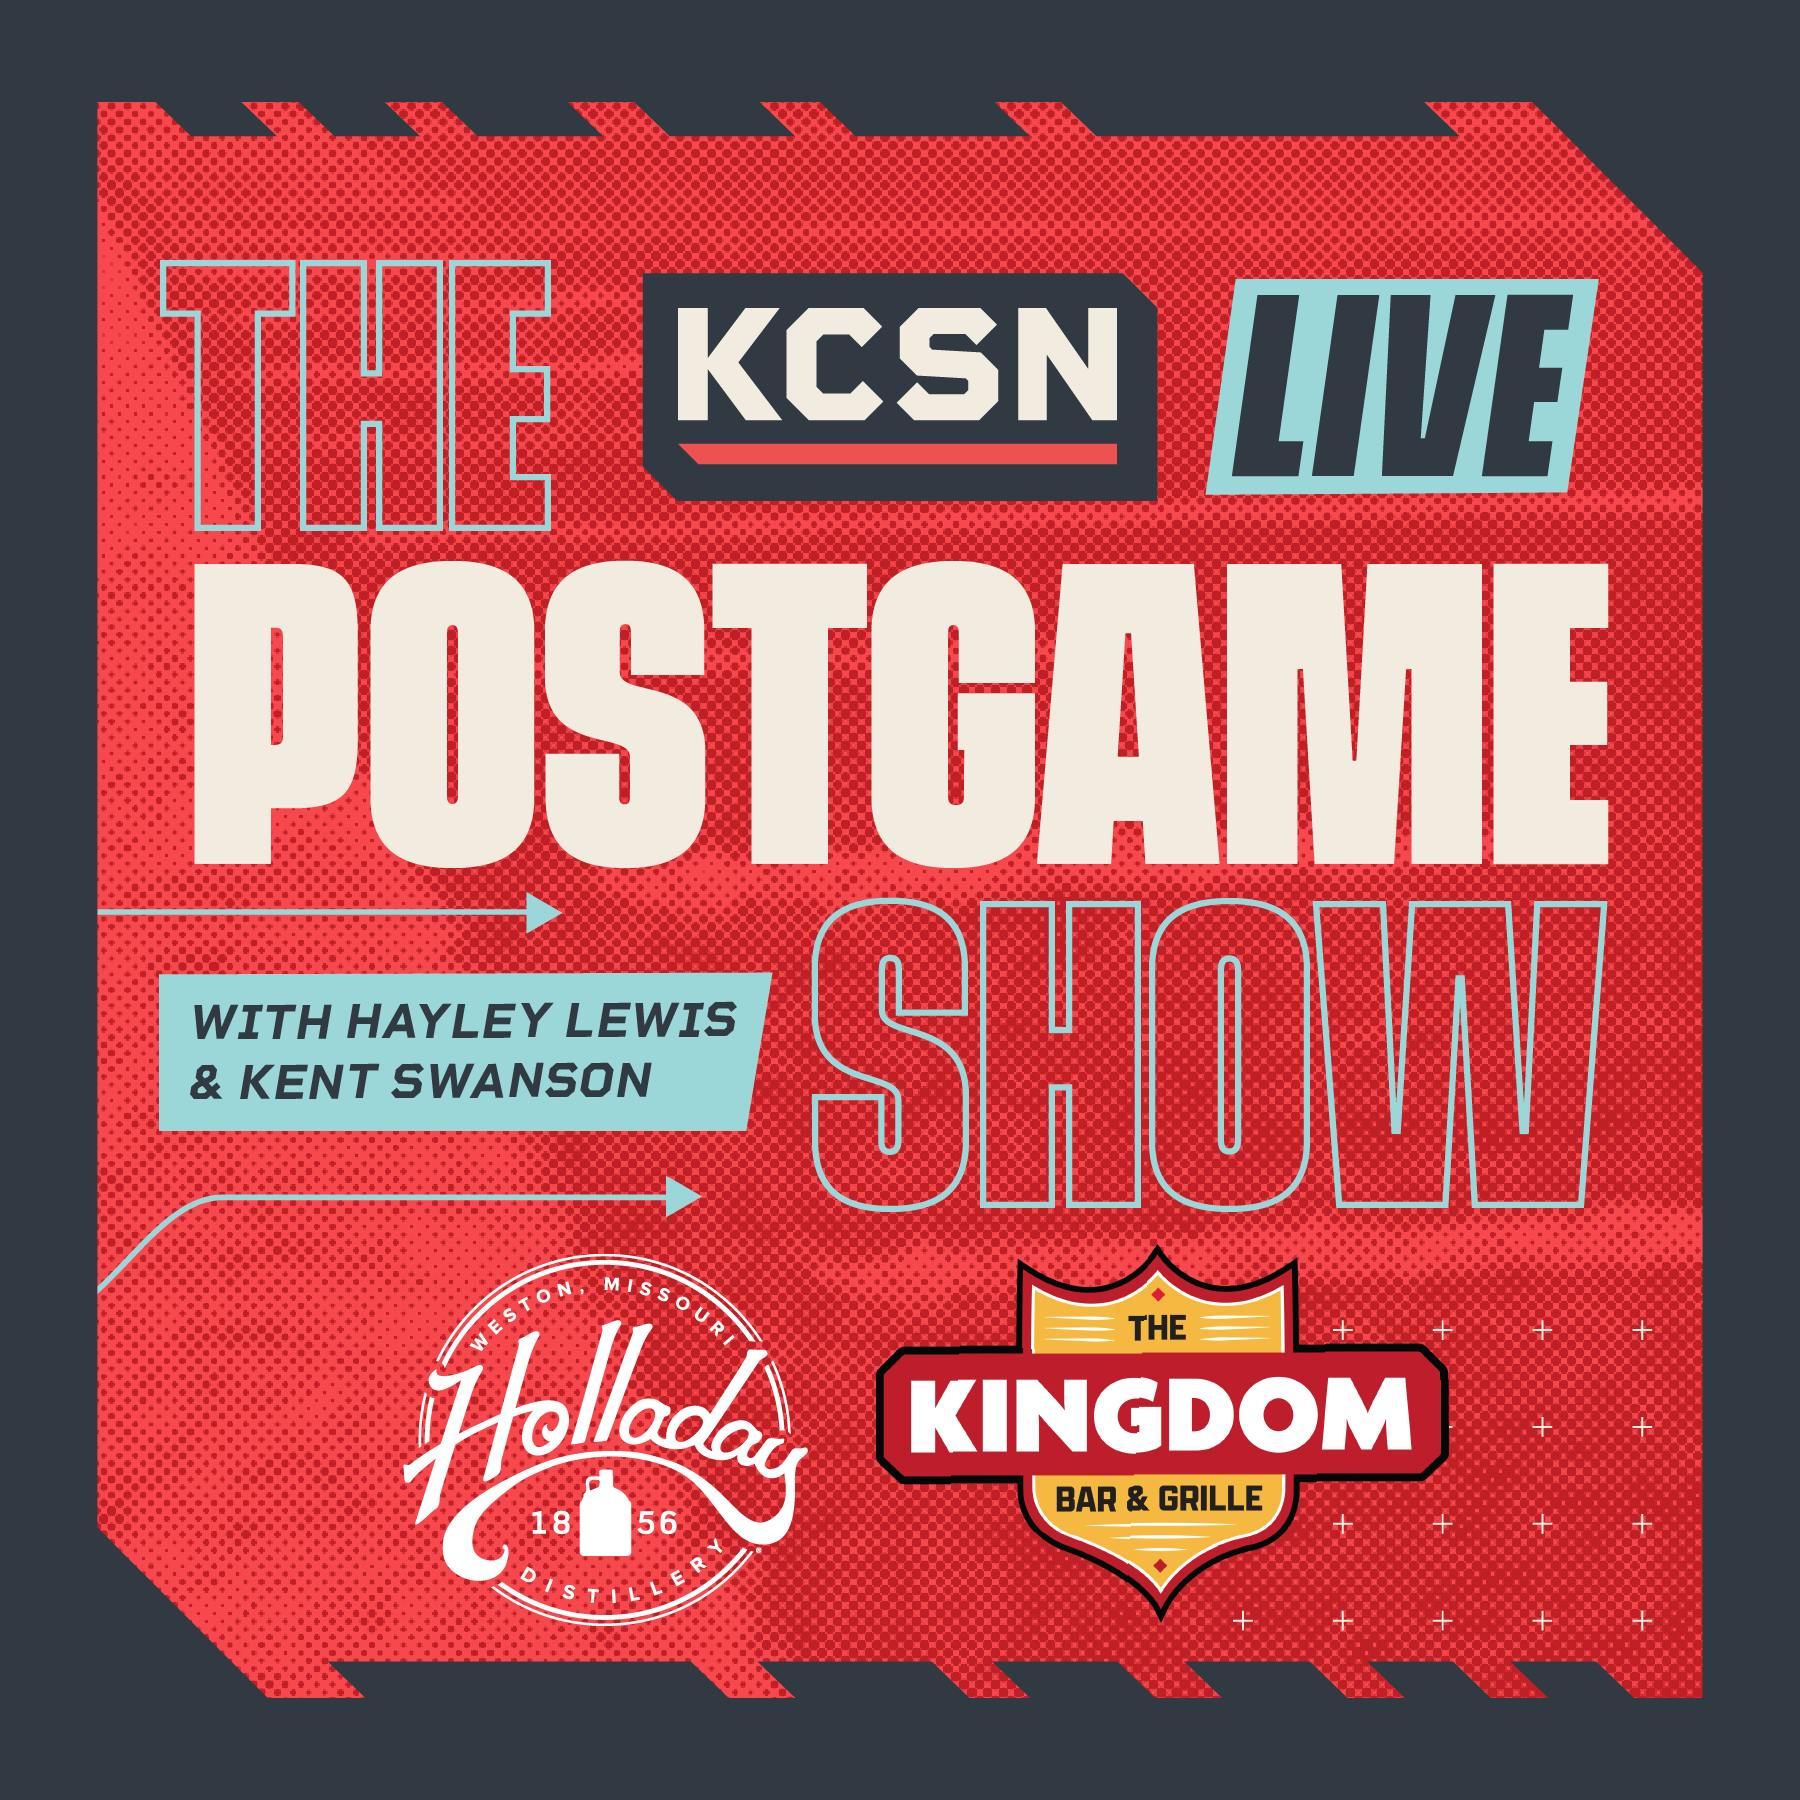 KCSN Live Postgame Show 1/28: Chiefs Advance to Super Bowl With 17-10 Win vs. Ravens